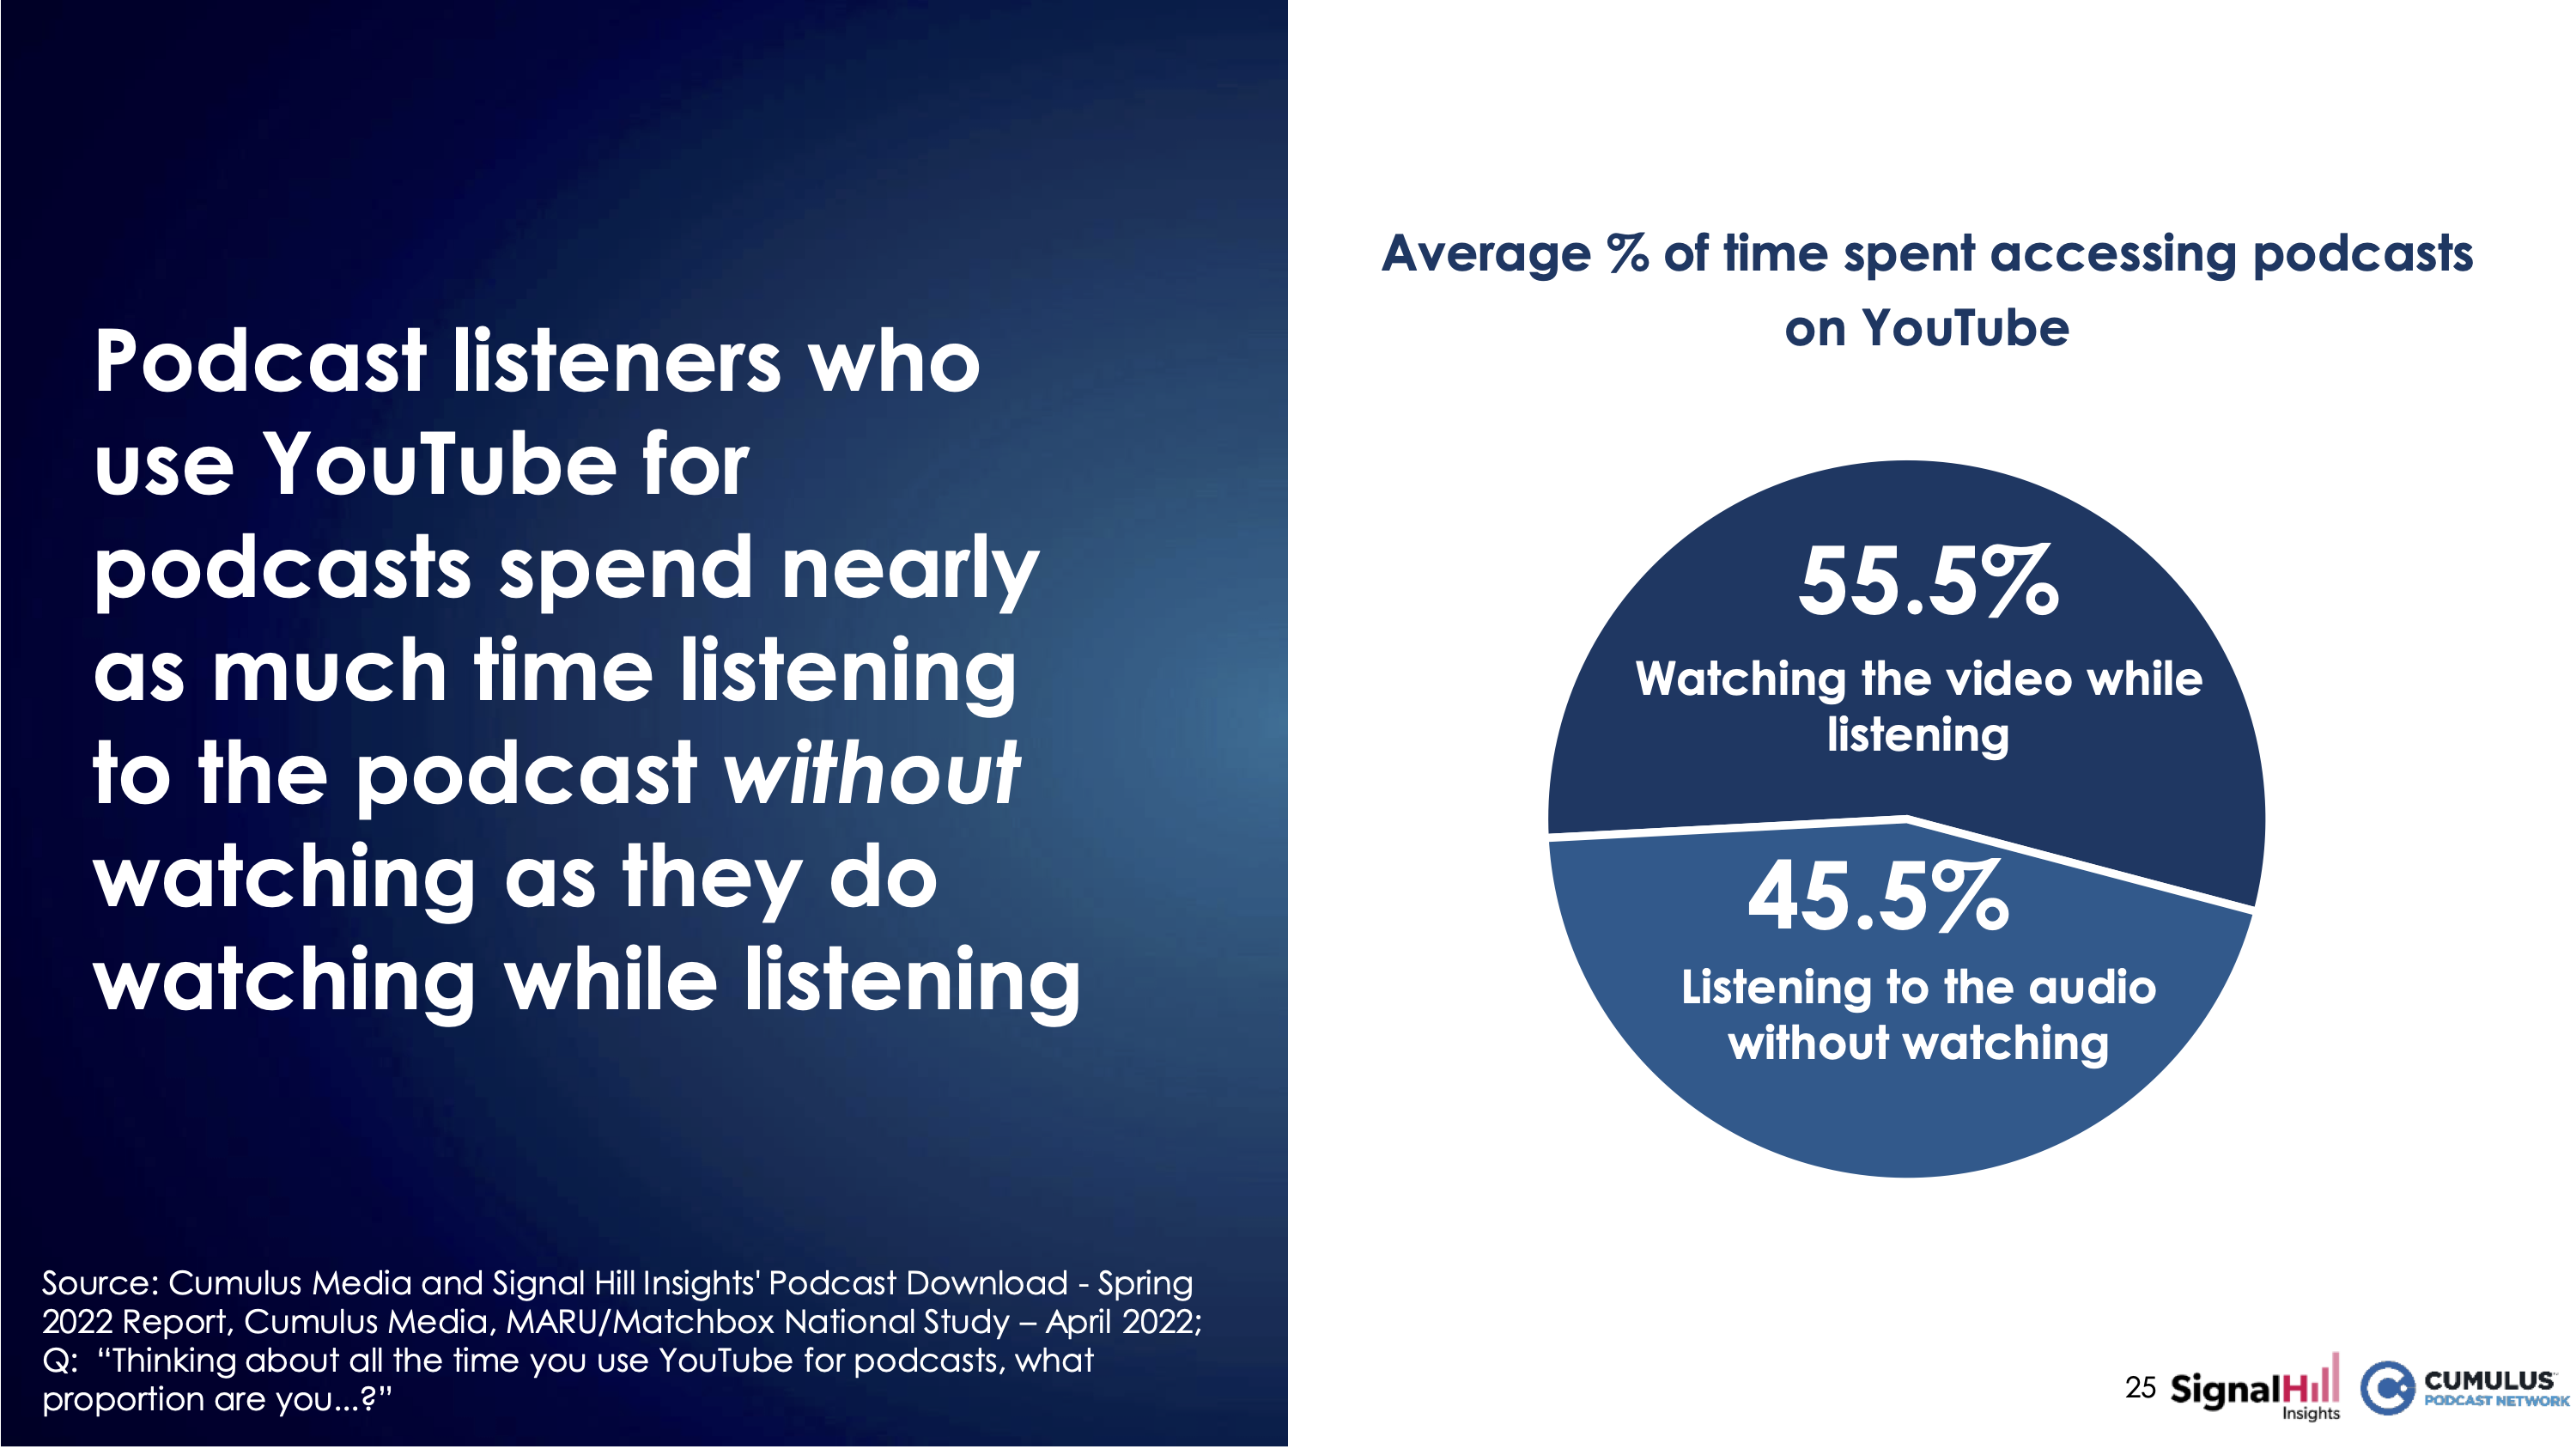 Watching or listening to podcasts on YouTube